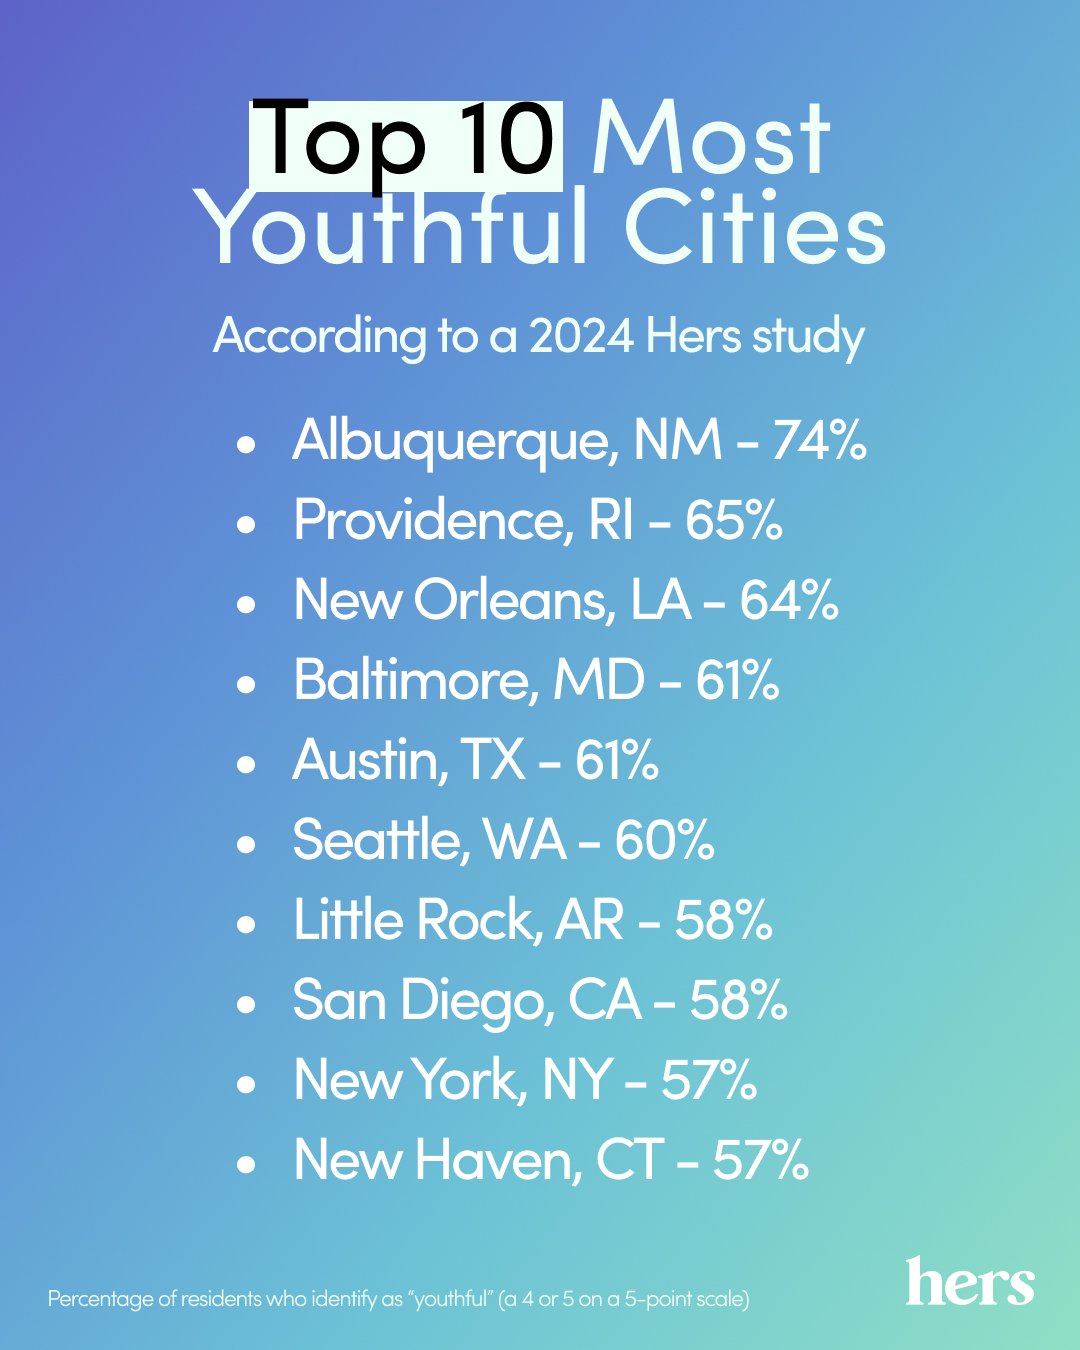 Image showing the top 10 most youthful cities by Hers.